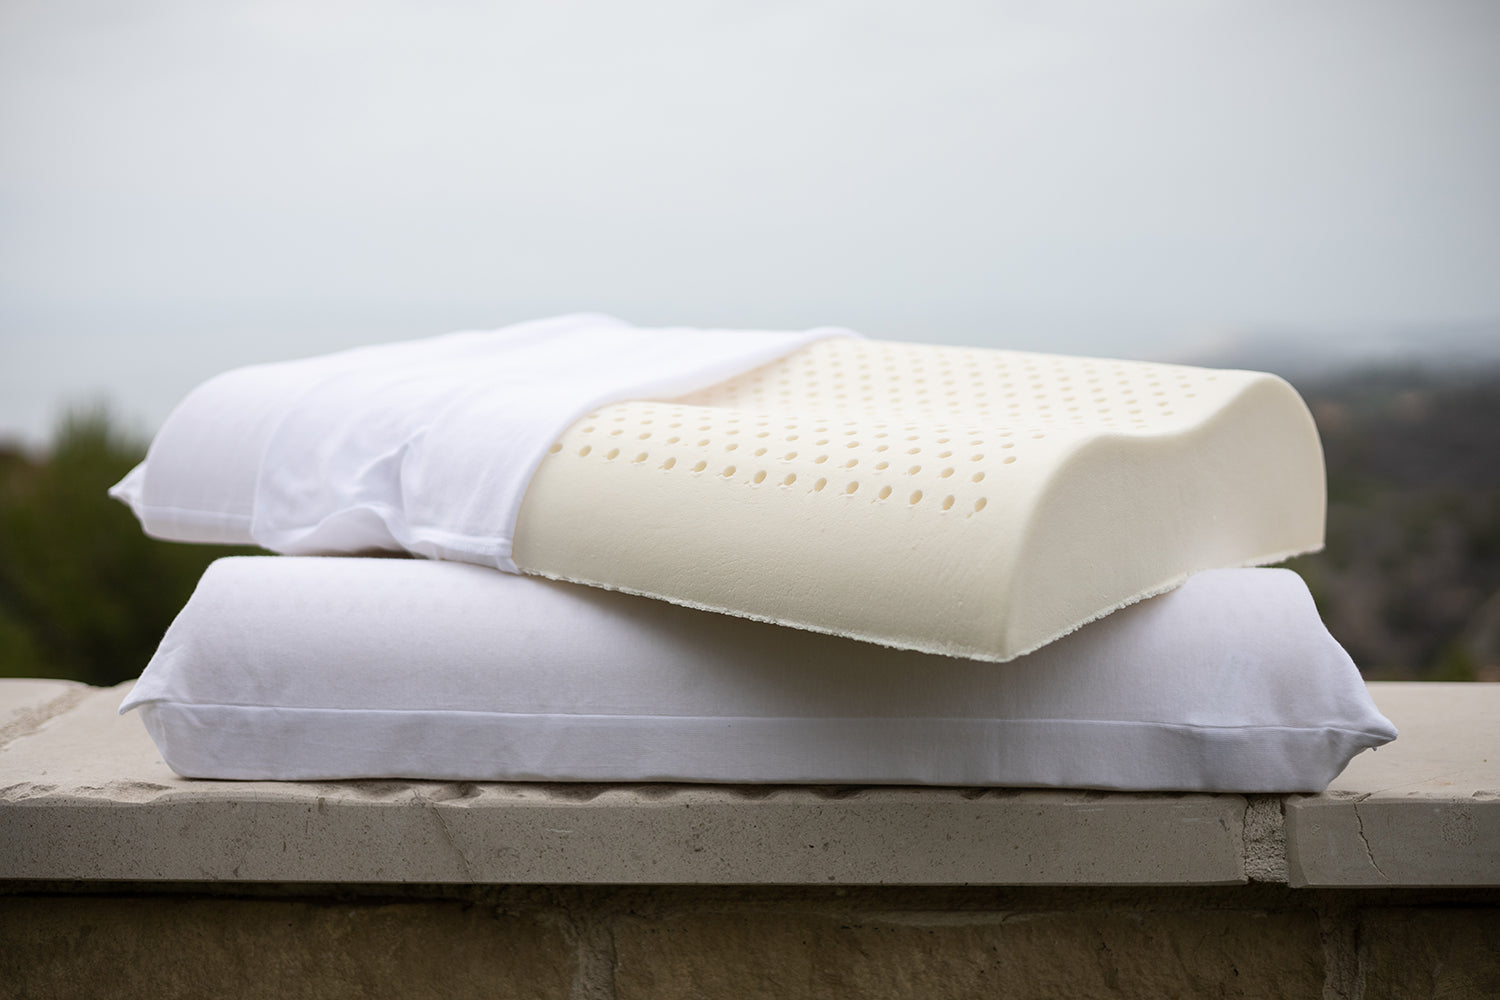 Is a Latex Pillow Good for Neck Pain?